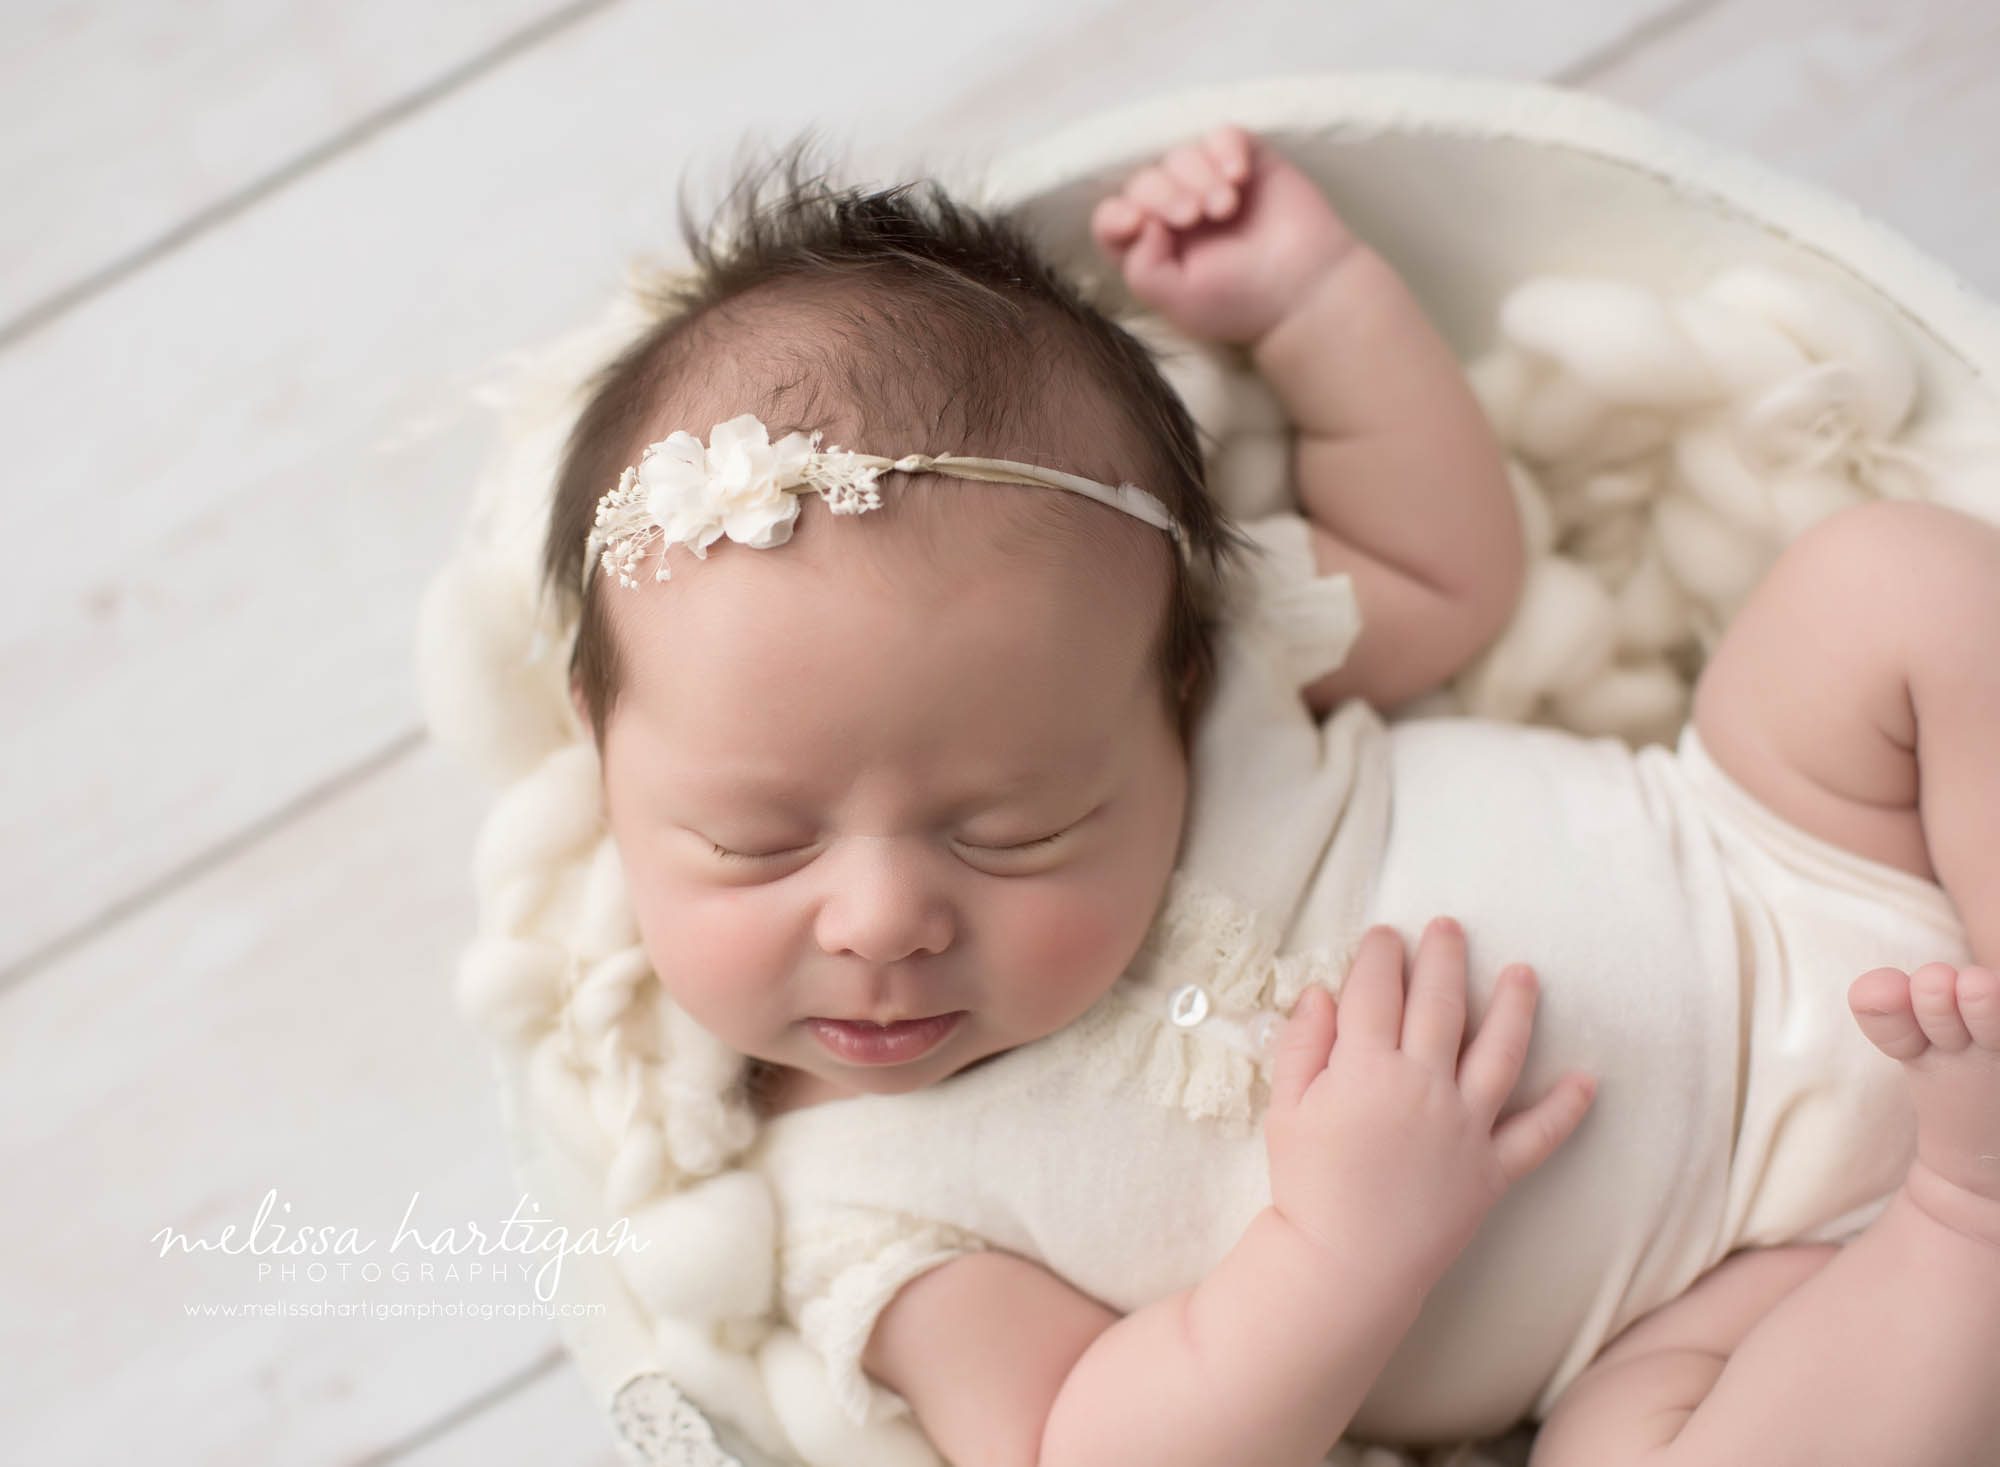 Melissa Hartigan Photography Connecticut Newborn Photographer Coventry Ct Middlefield CT baby Fairfield county Newborn and maternity photography Baby girl cream outfit and headband on cream knit blanket in white bowl sleeping on back